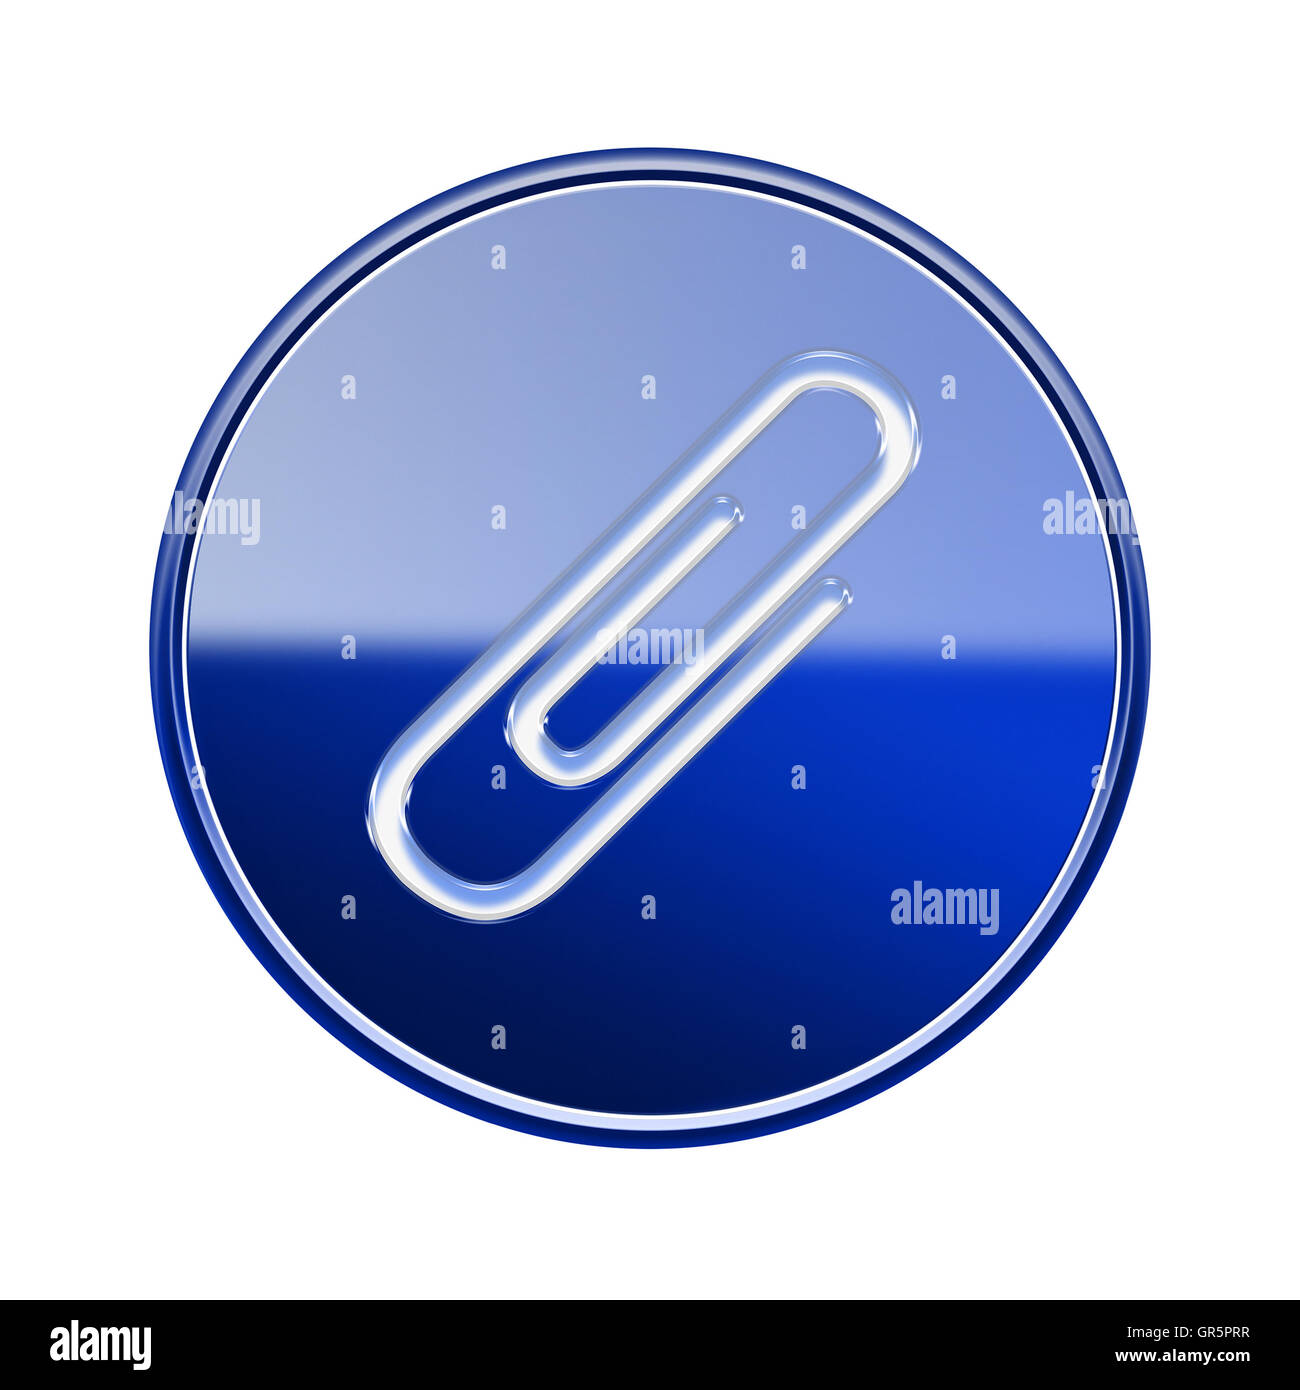 Paper clip icon glossy blue, isolated on white background Stock Photo